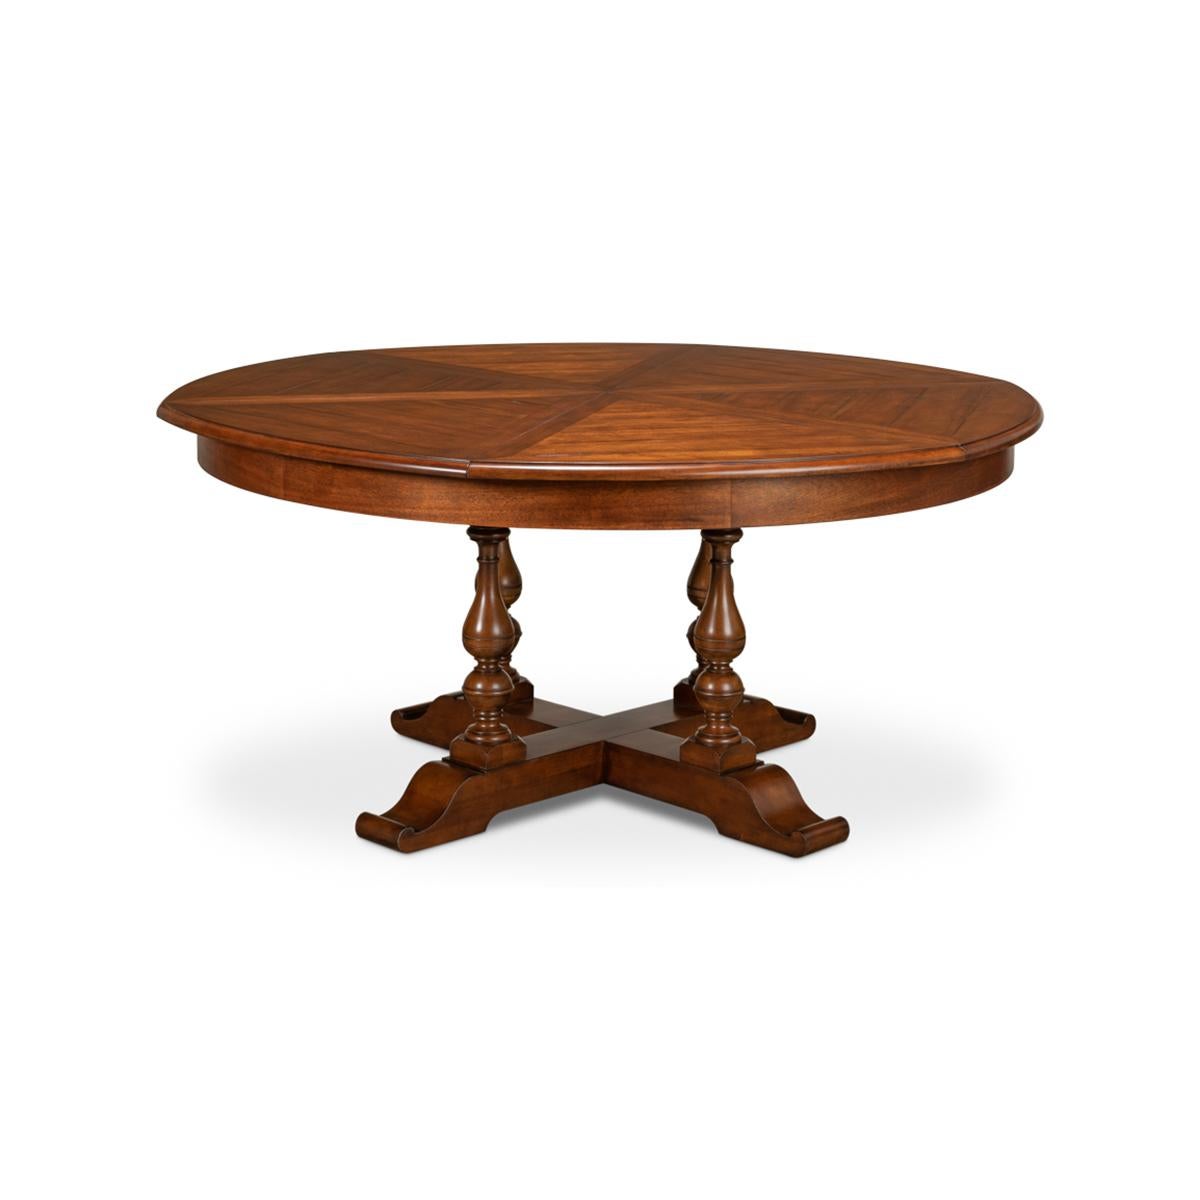 Early English style round extendable jupe dining table extending to 84 inches. Walnut table is veneered in finely figured walnut segments and supported on four solid vase-shaped turned legs leading to the X form base.

The table extends from 64 to